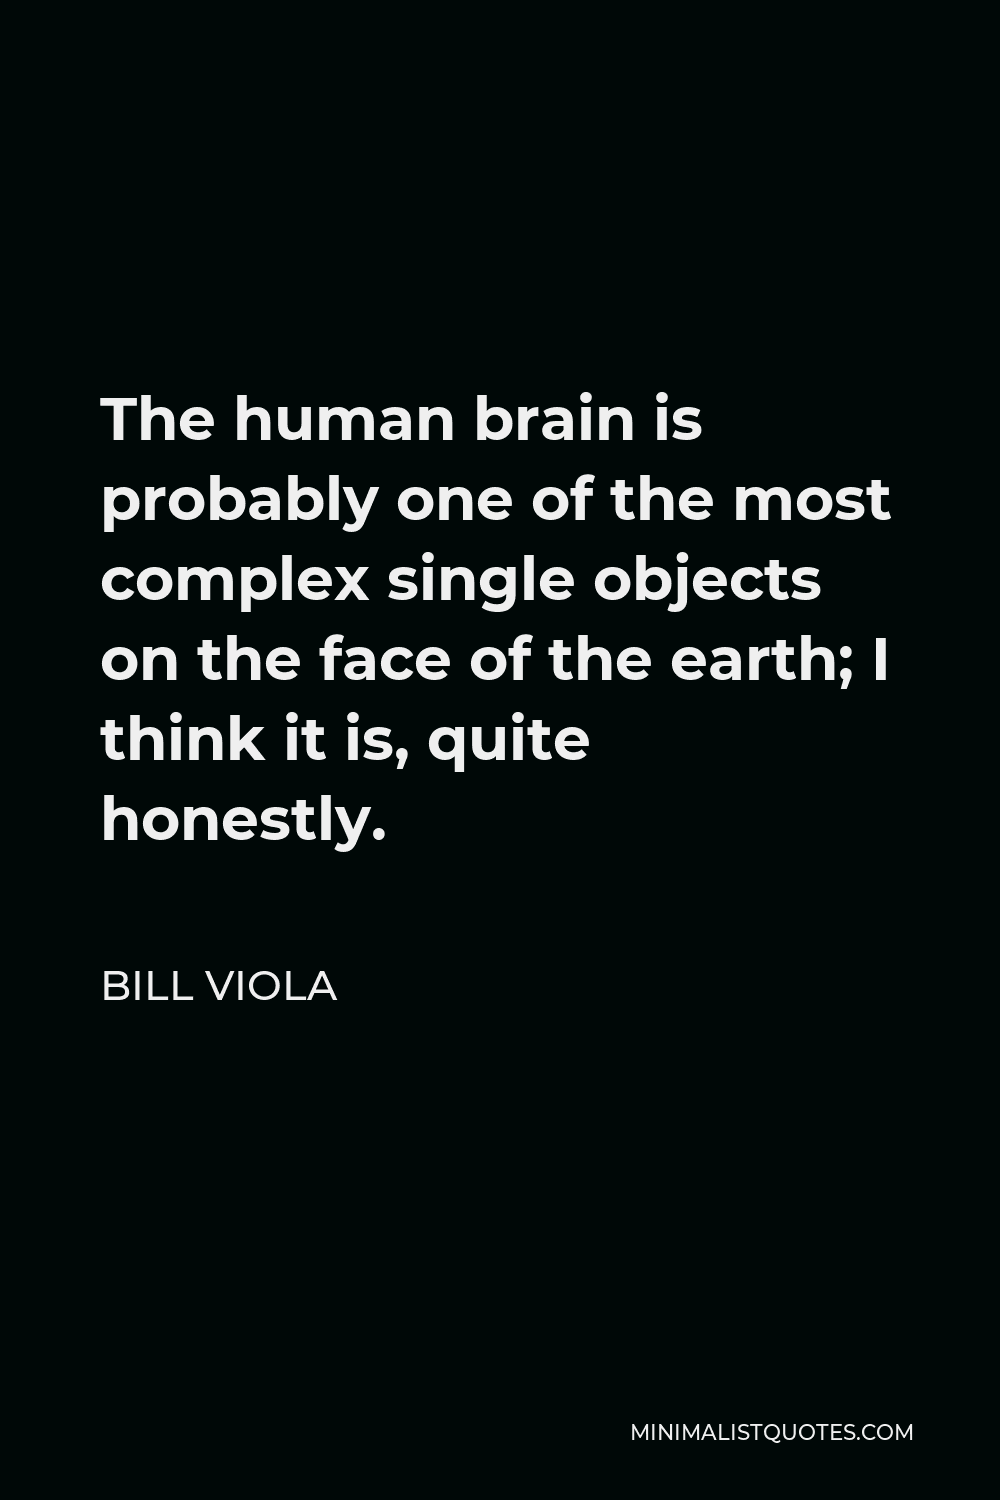 Bill Viola Quote - The human brain is probably one of the most complex single objects on the face of the earth; I think it is, quite honestly.